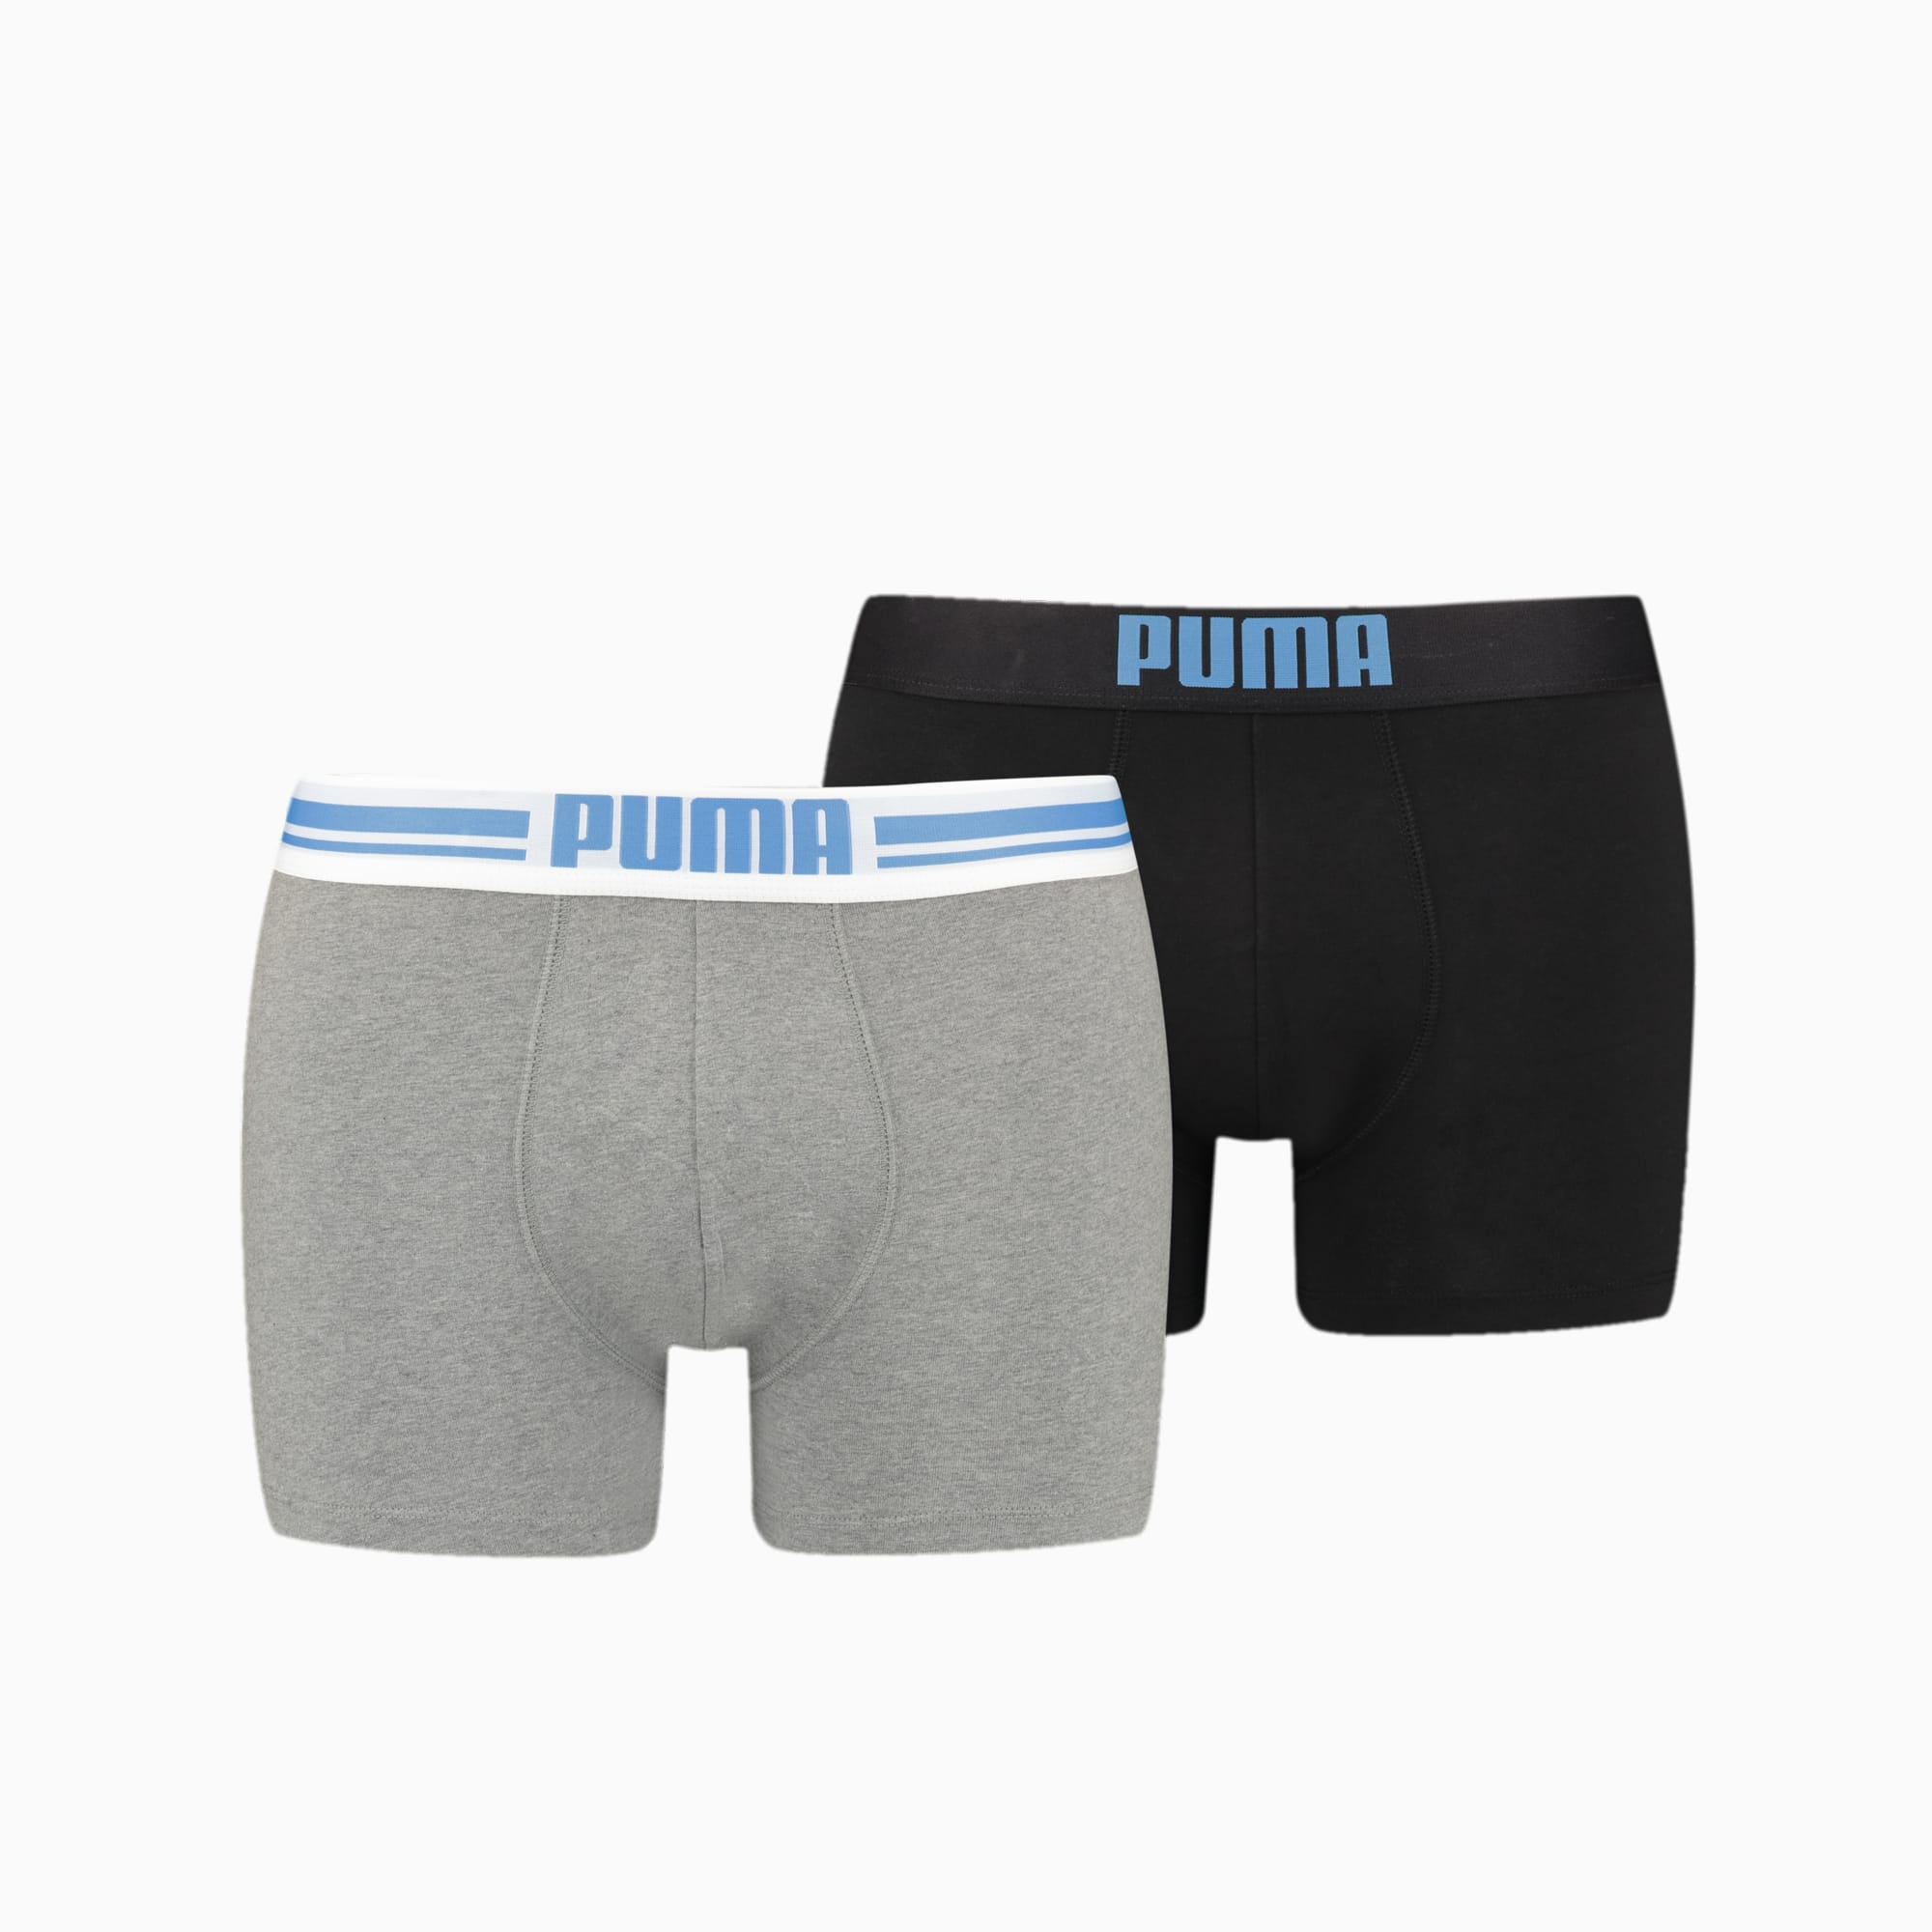 PUMA Placed Logo Men's Boxers 2 Pack, Grey/Blue